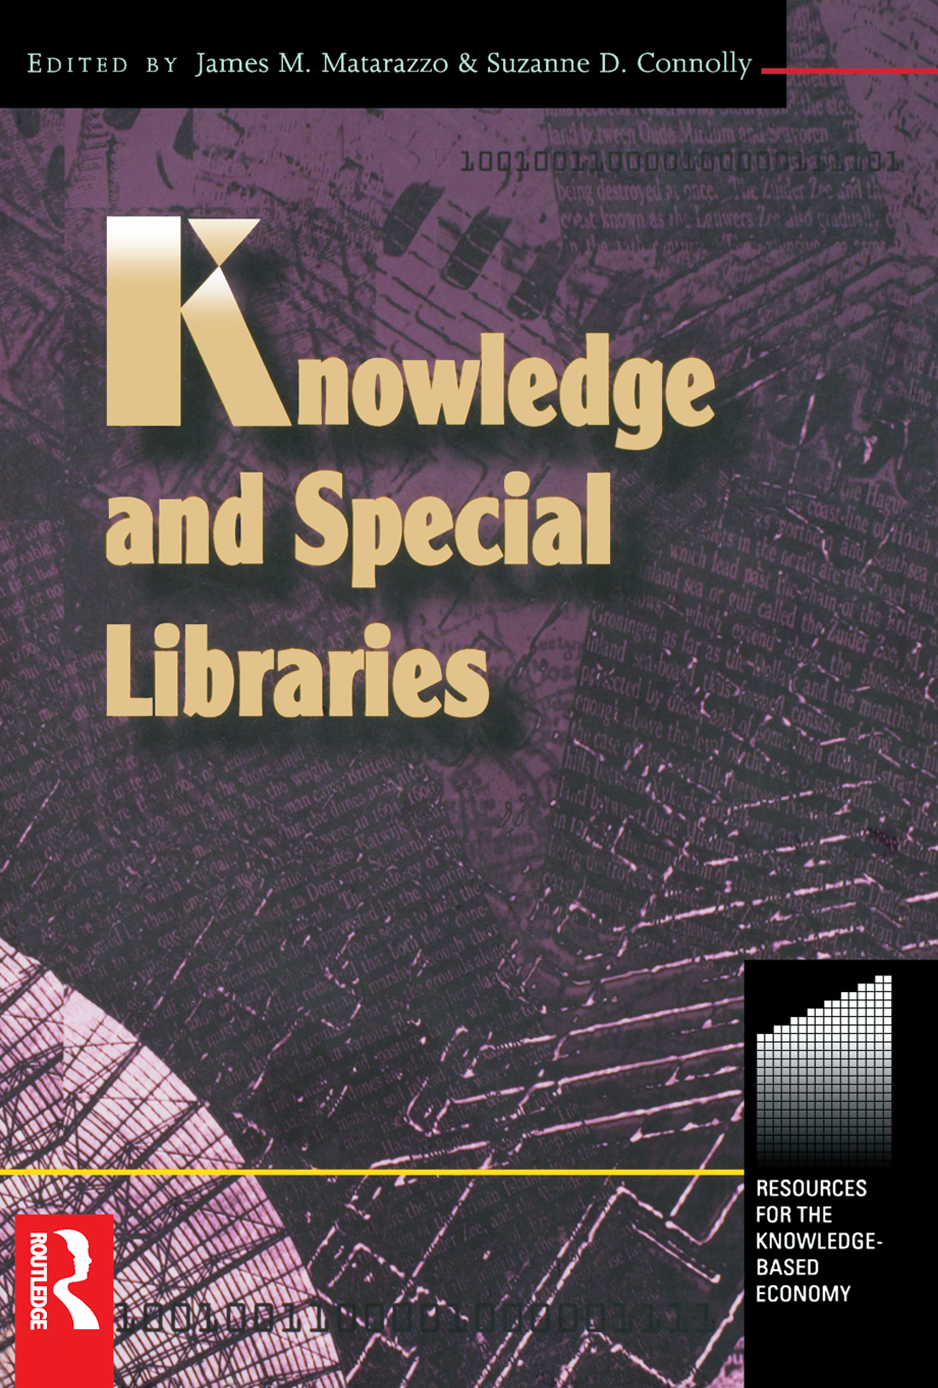 Knowledge and Special Libraries - Suzanne Connolly, James Matarazzo